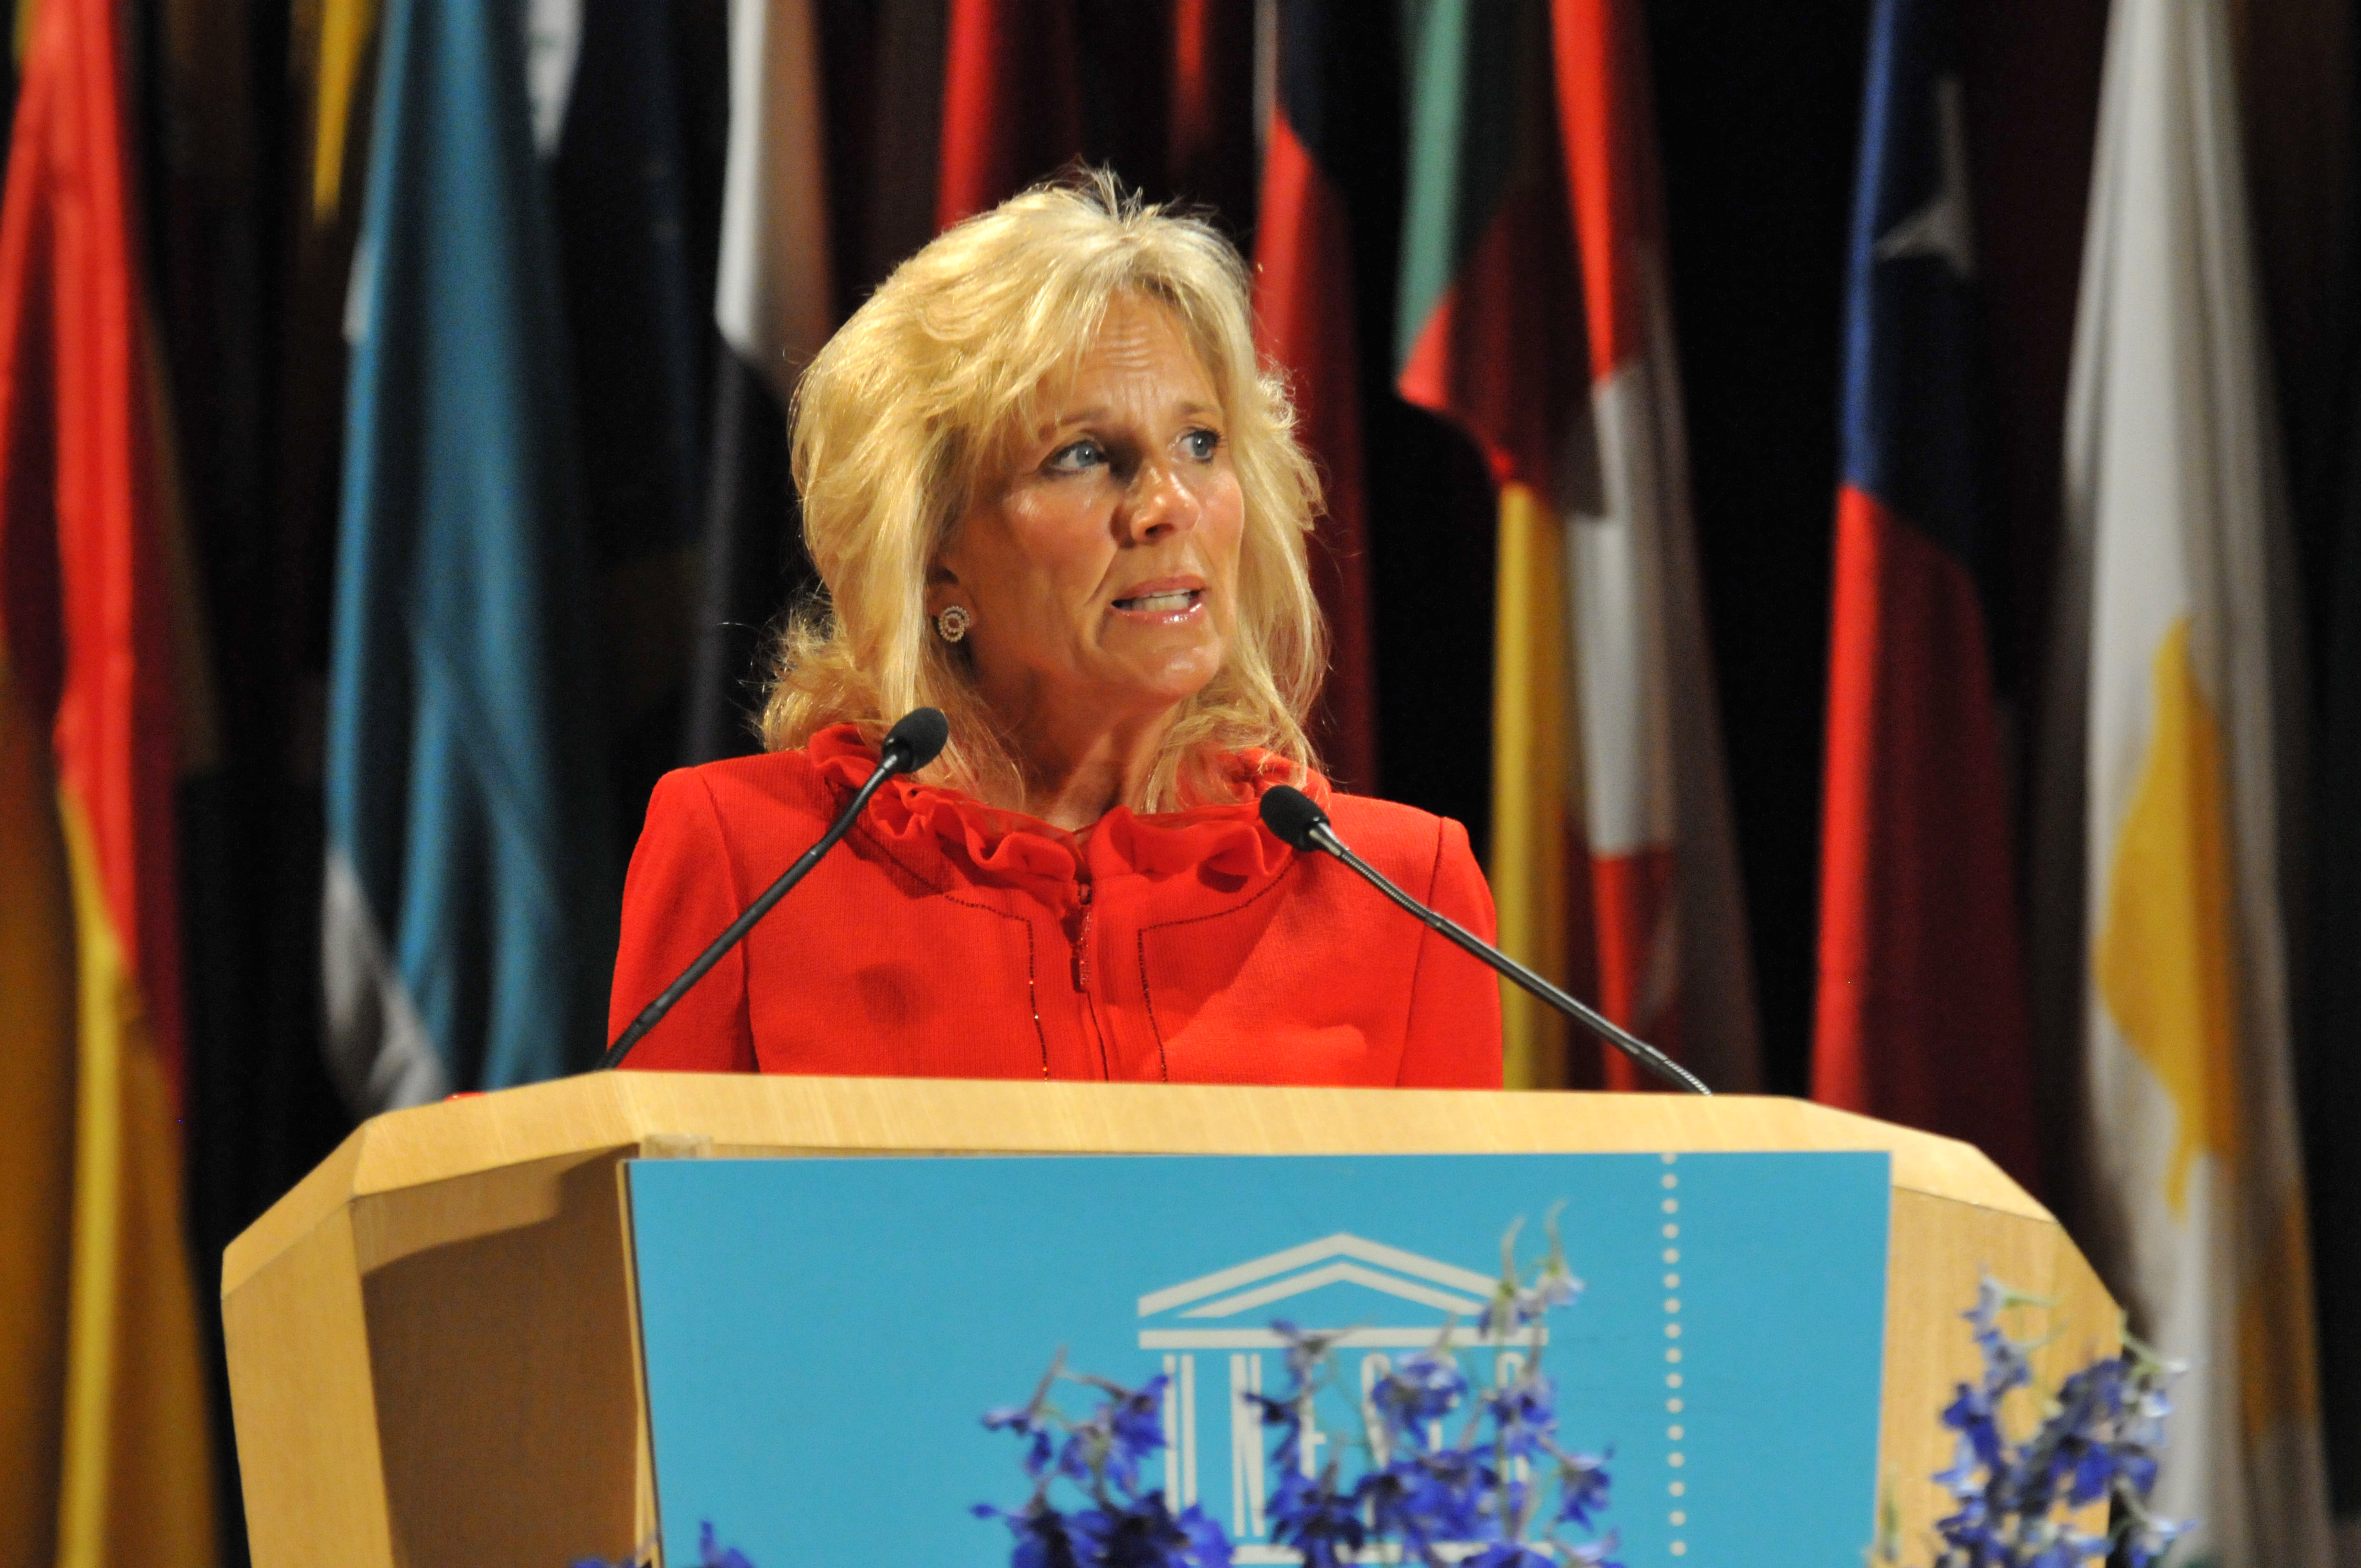 World Conference on Higher Education closes with an appeal for investment and cooperation